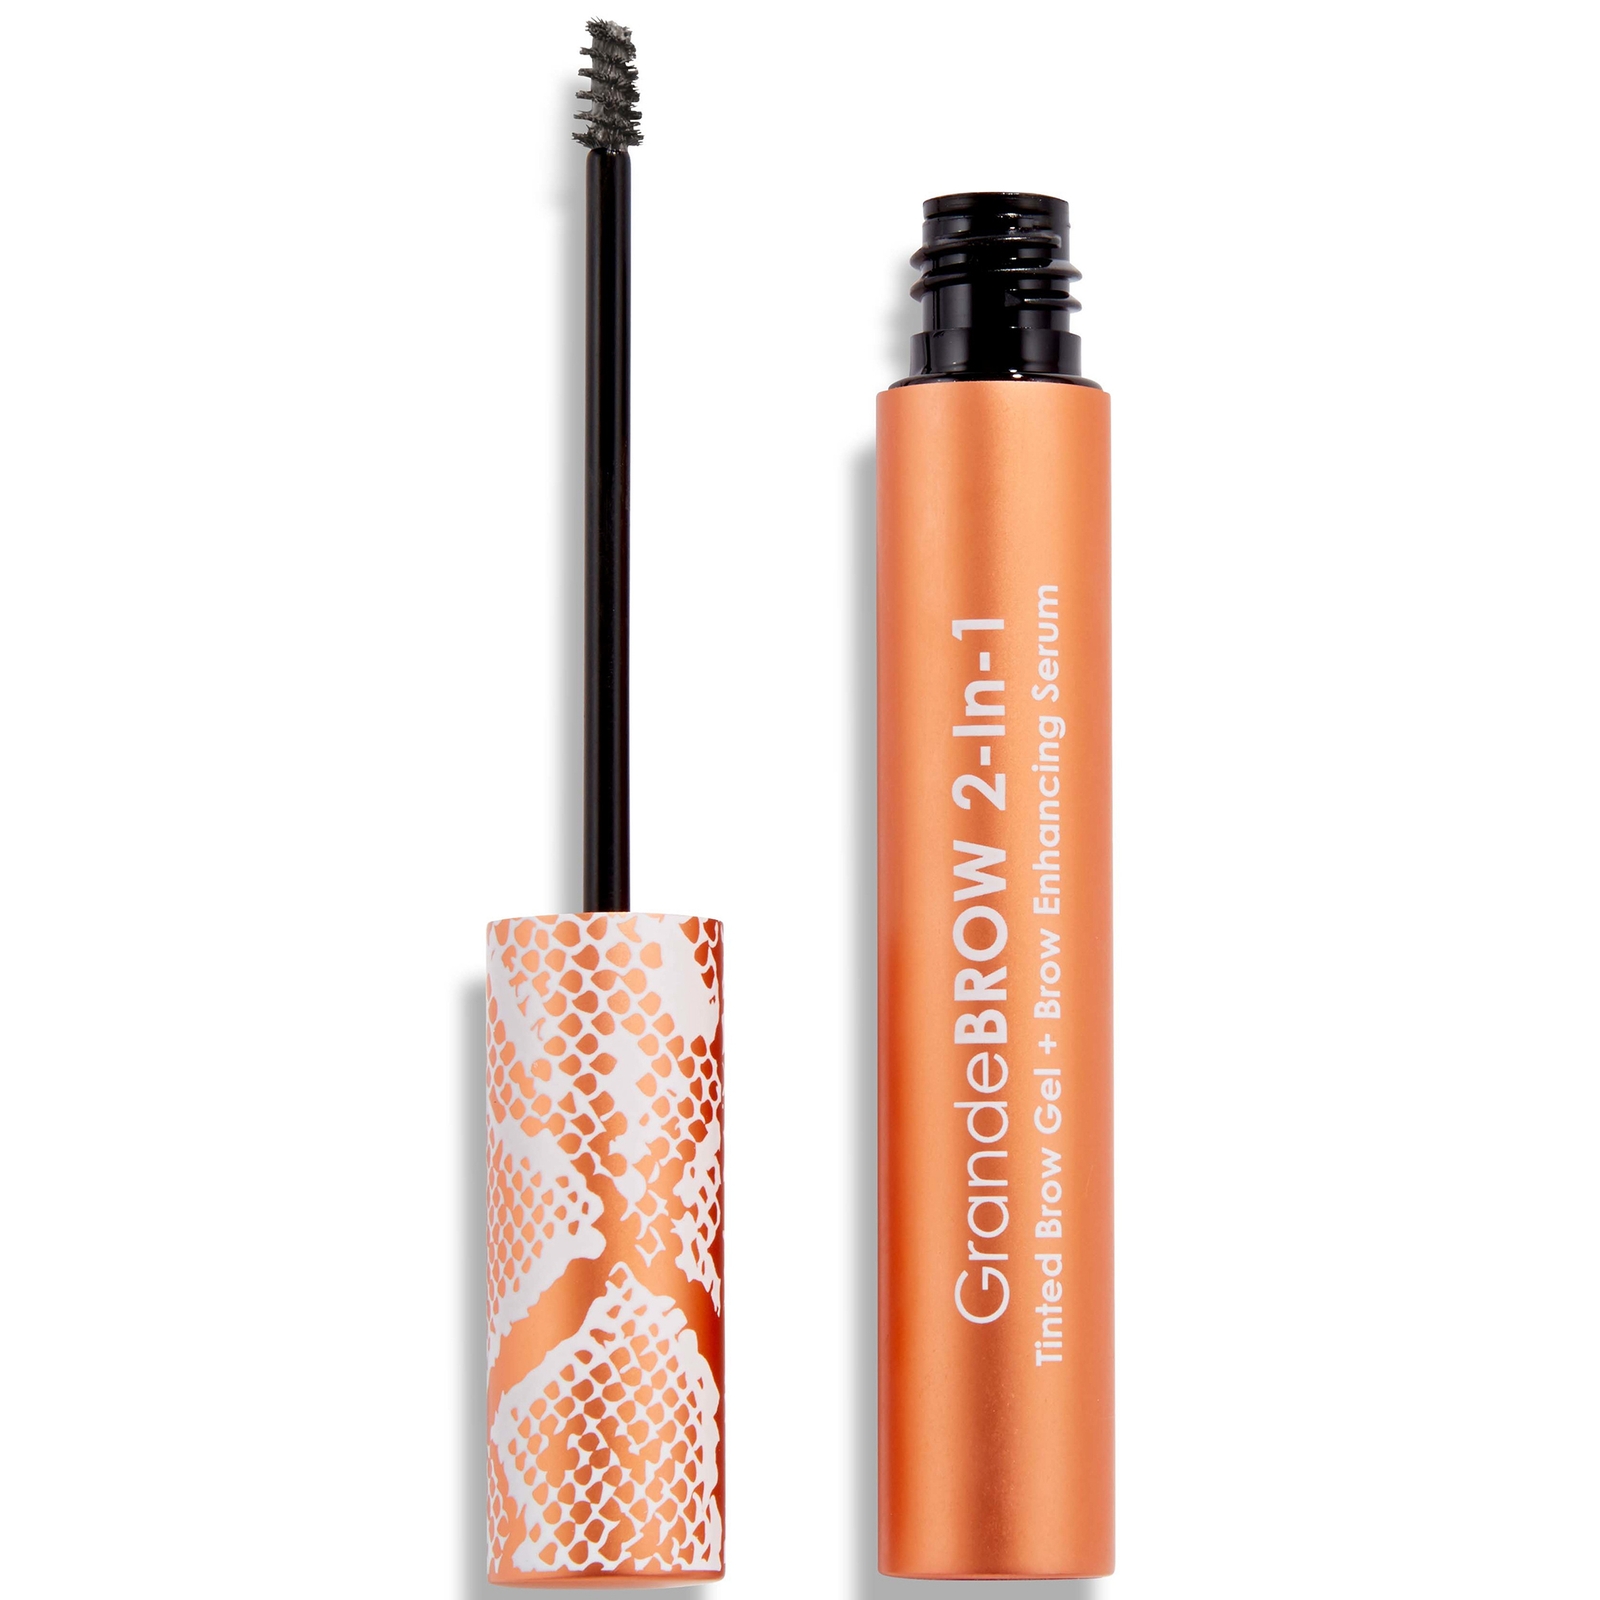 Grande Cosmetics Grandebrow 2-in-1 Tinted Brow Gel And Brow Enhancing Serum 3.5ml (various Shades) In Taupe